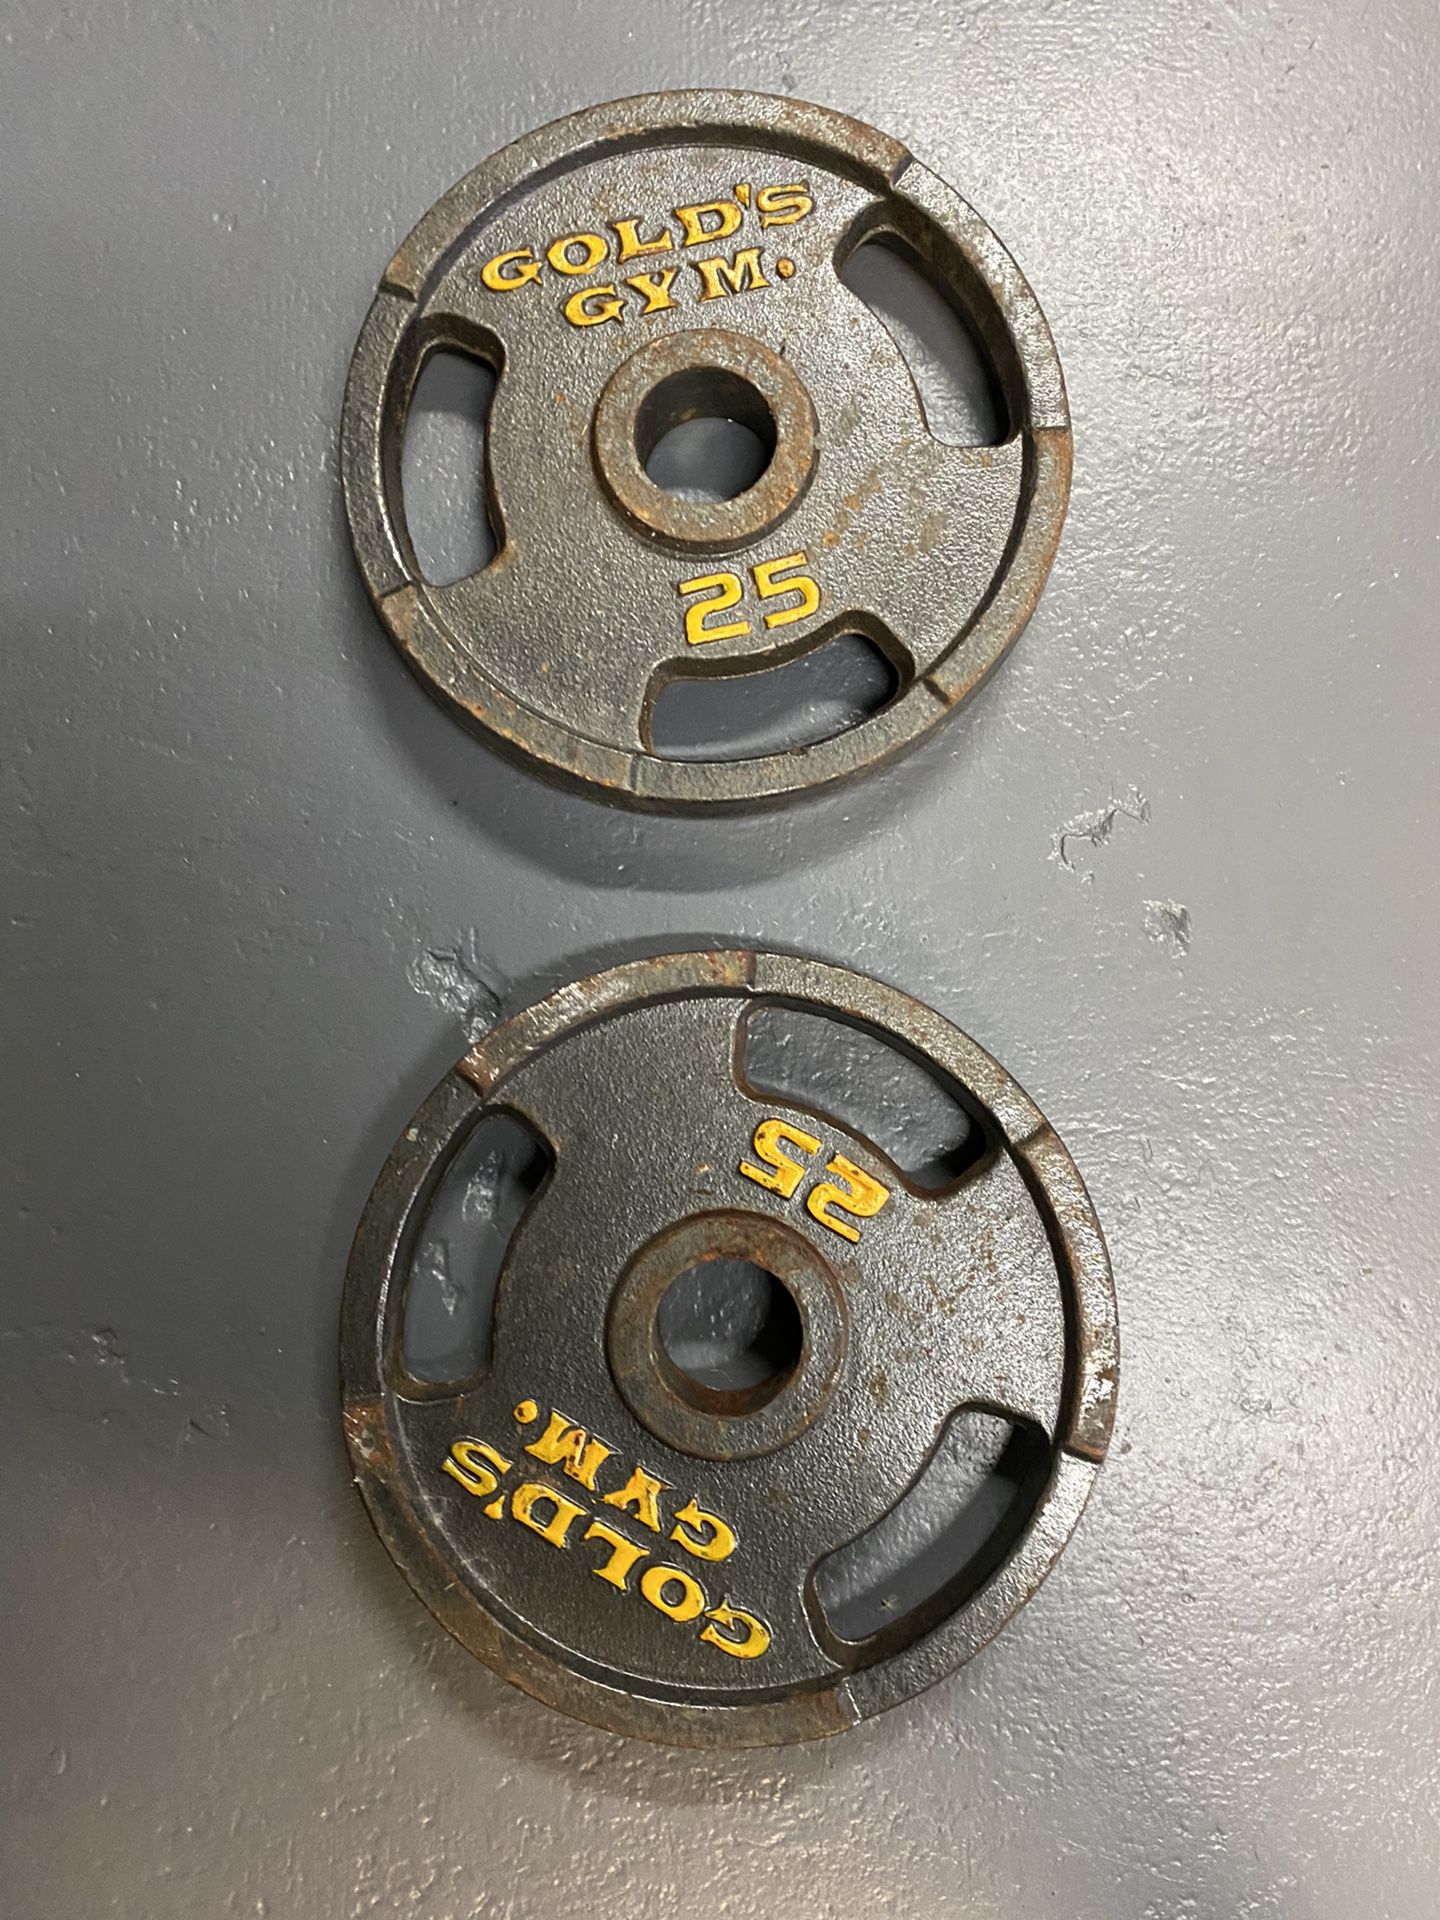 2 Gold's Gym Olympic Grip Weight Plates